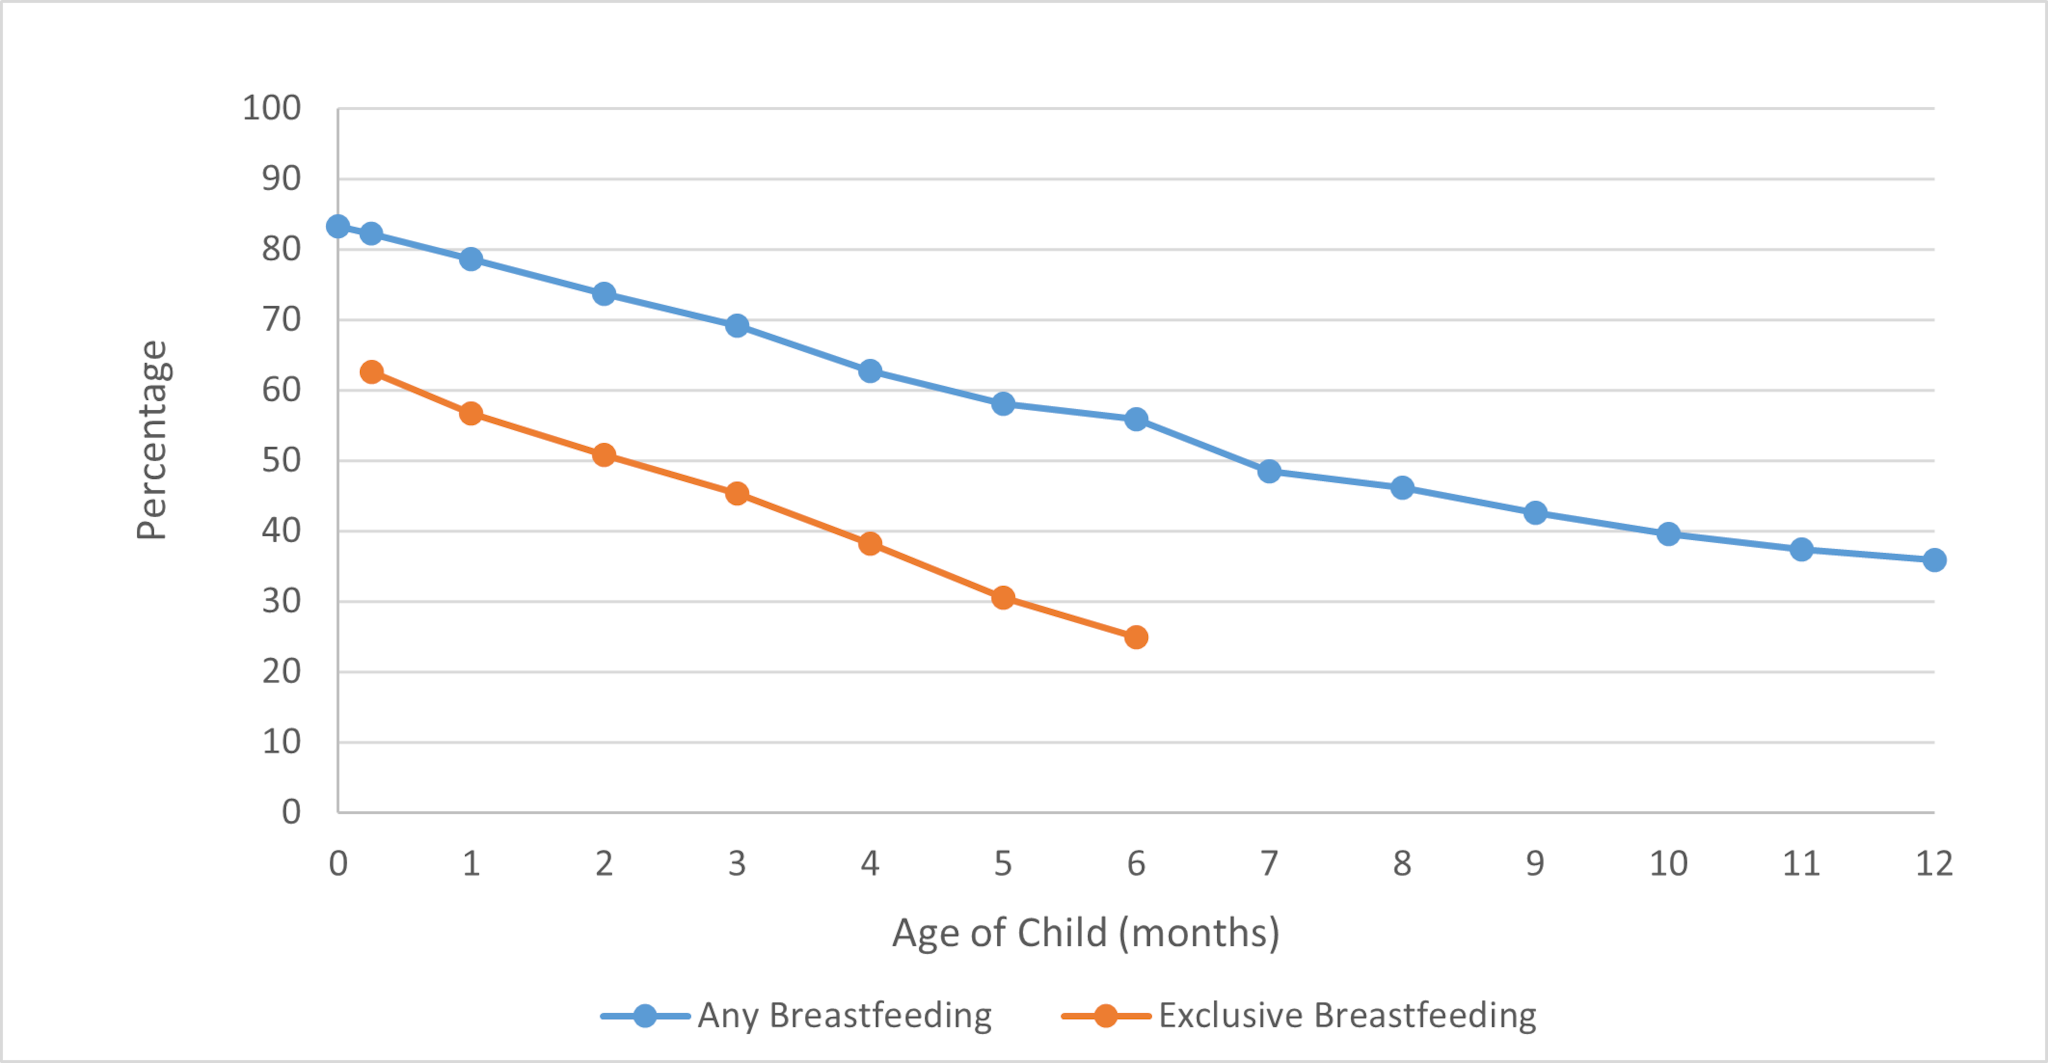 Rates of Any and Exclusive Breastfeeding by Age Among Children Born in 2019, National Immunization Survey, United States